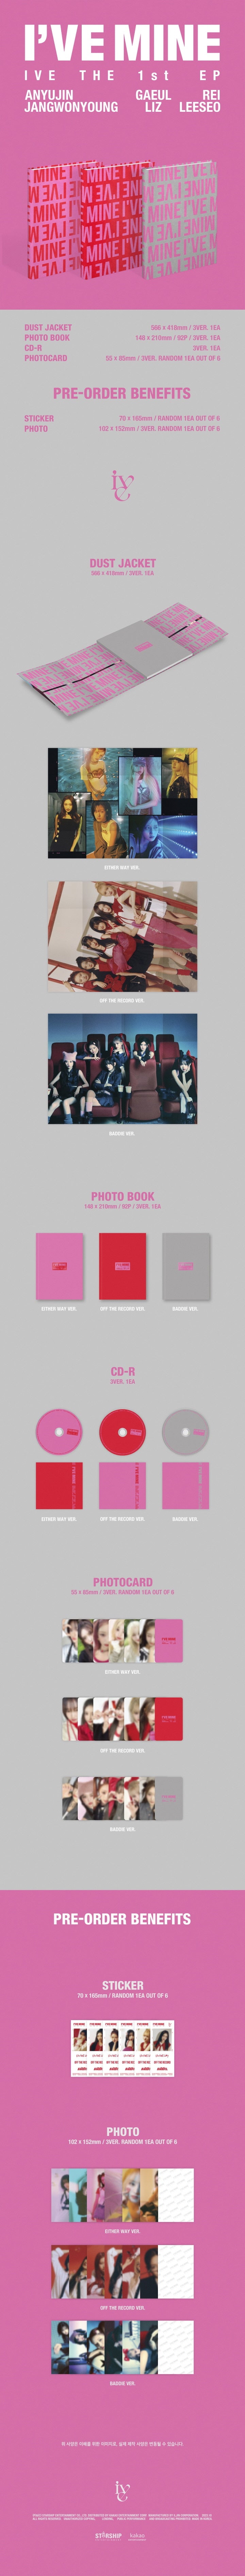 1 CD
1 Dust Jacket
1 Photo Book (92 pages)
1 Photo Card (random out of 6 types)